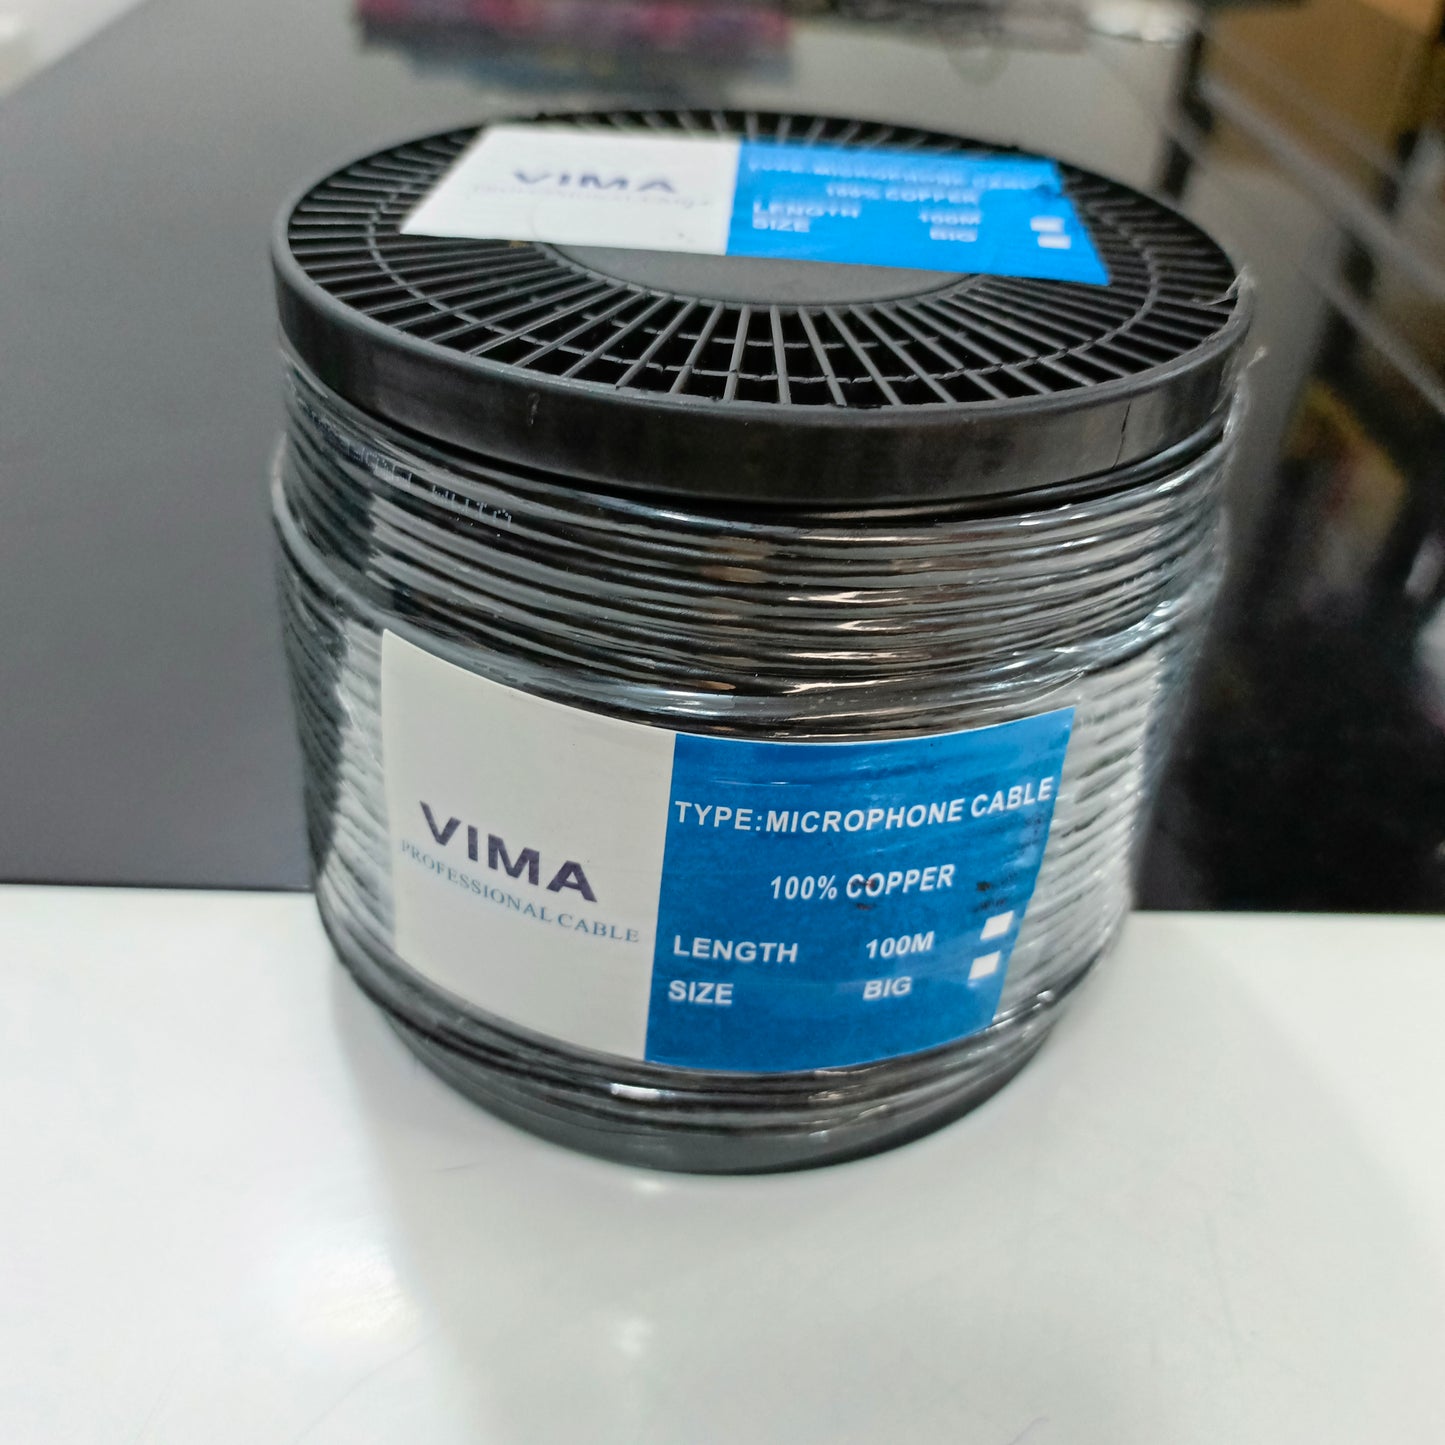 VIMA 100 Meters 100% Pure Copper Microphone cable - Brand New